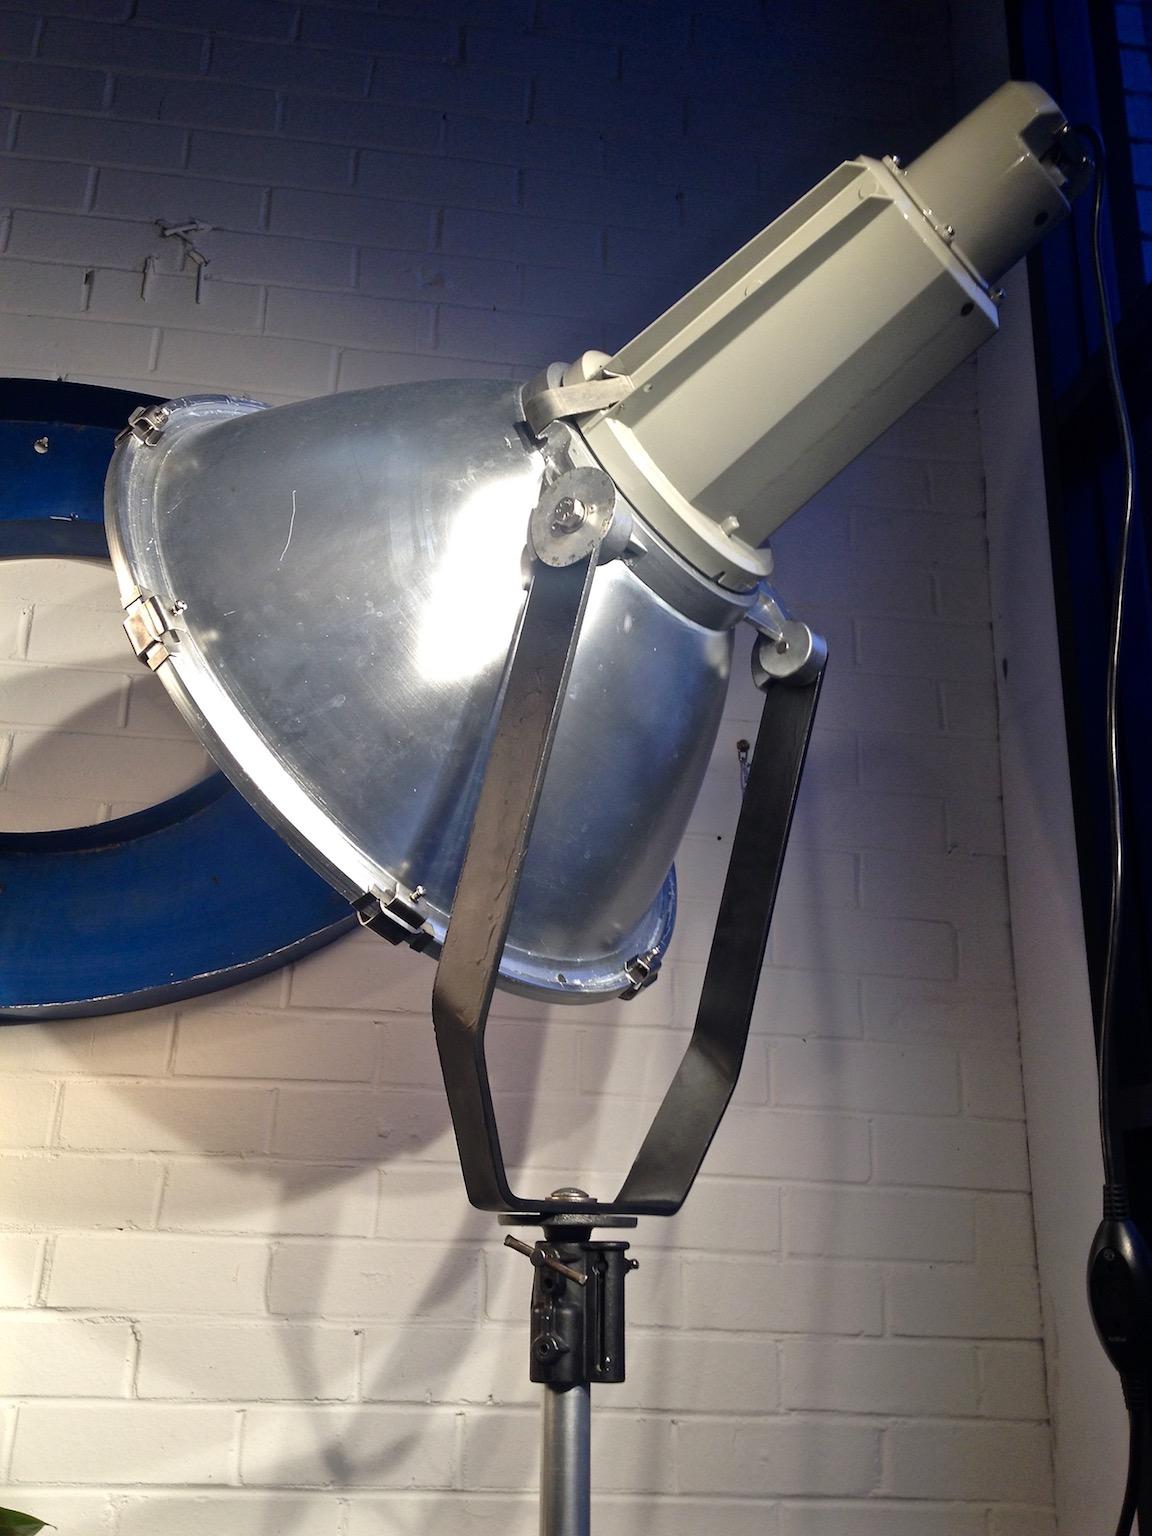 This is an original Phillips industrial studio light with an alloy Manofrotton tripod base/stand.
This has been cleaned, polished and re-wired to take a standard household bulb and is in good working order. In very good vintage condition and fully